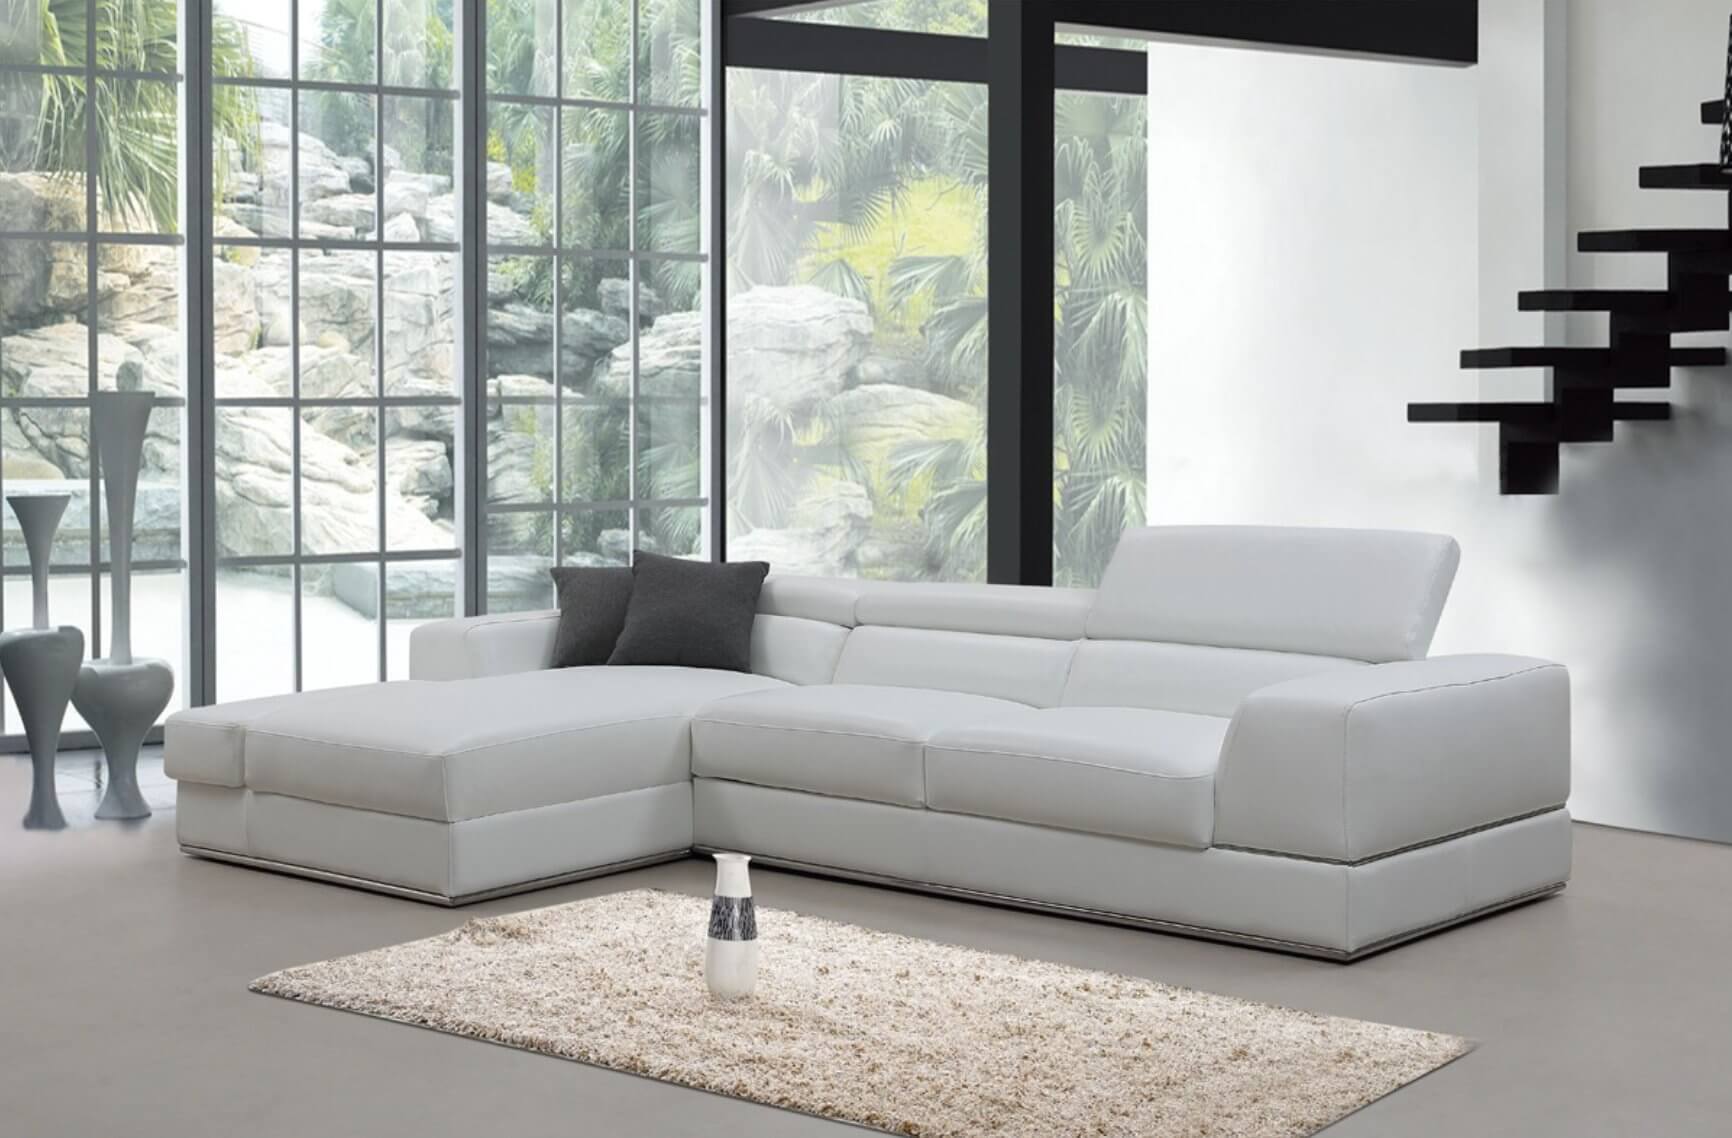 Contemporary White Leather Wide Arm Left Facing Chaise Sectional Sofa 123" - Revel Sofa 